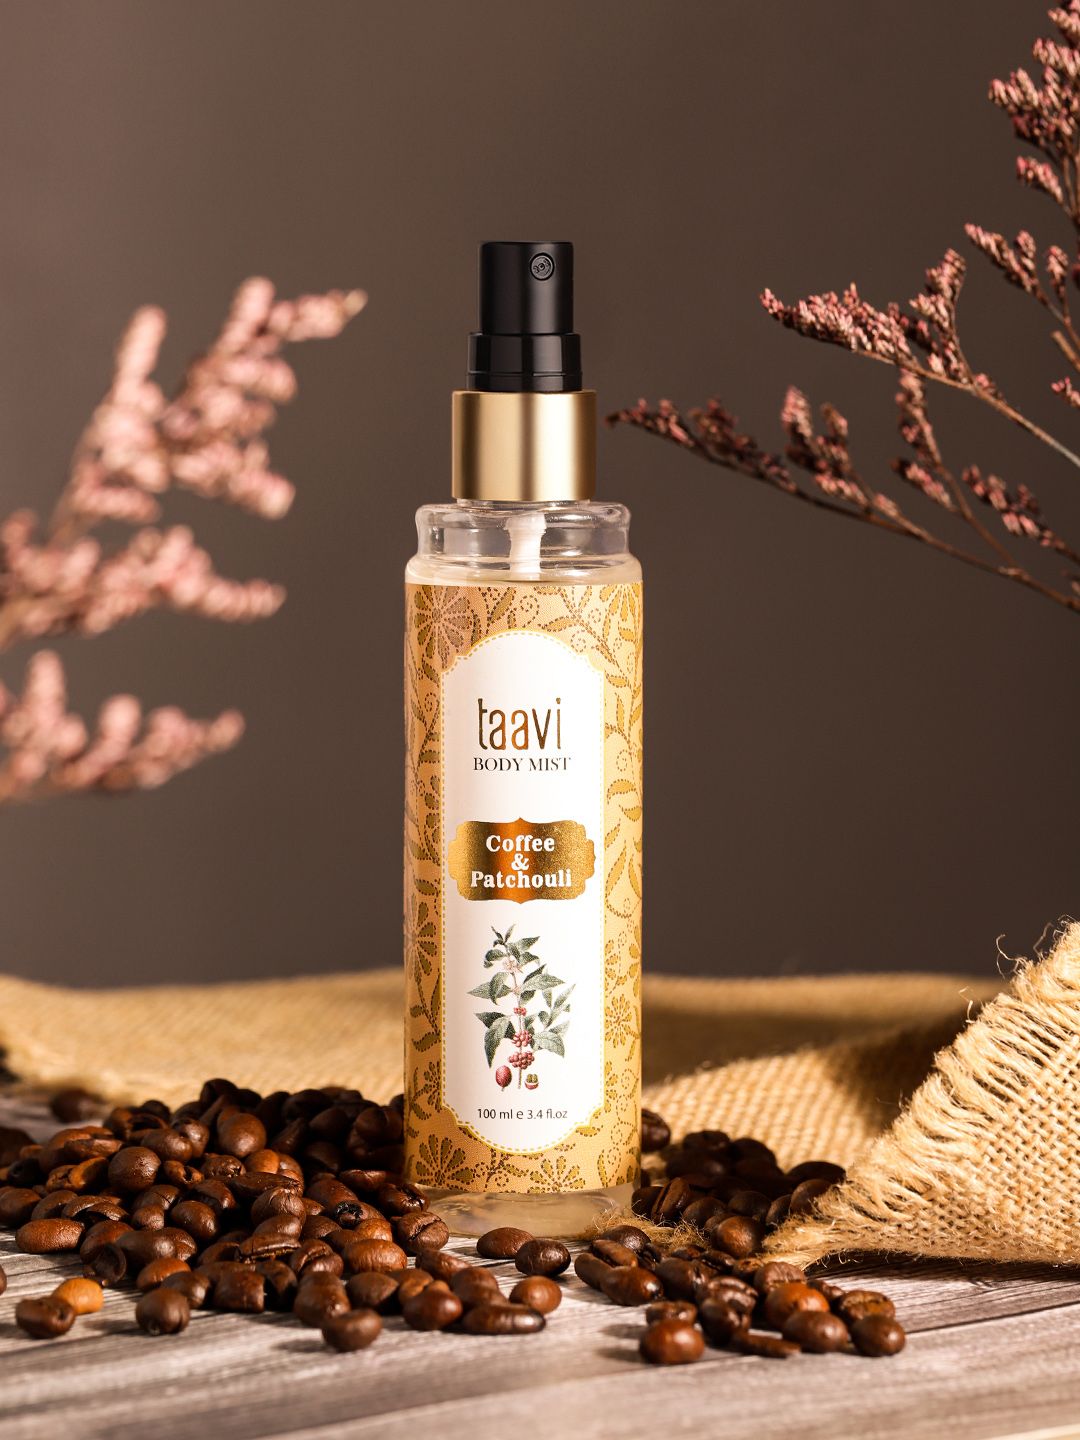 Taavi Coffee & Patchouli Body Mist - 100ml Price in India